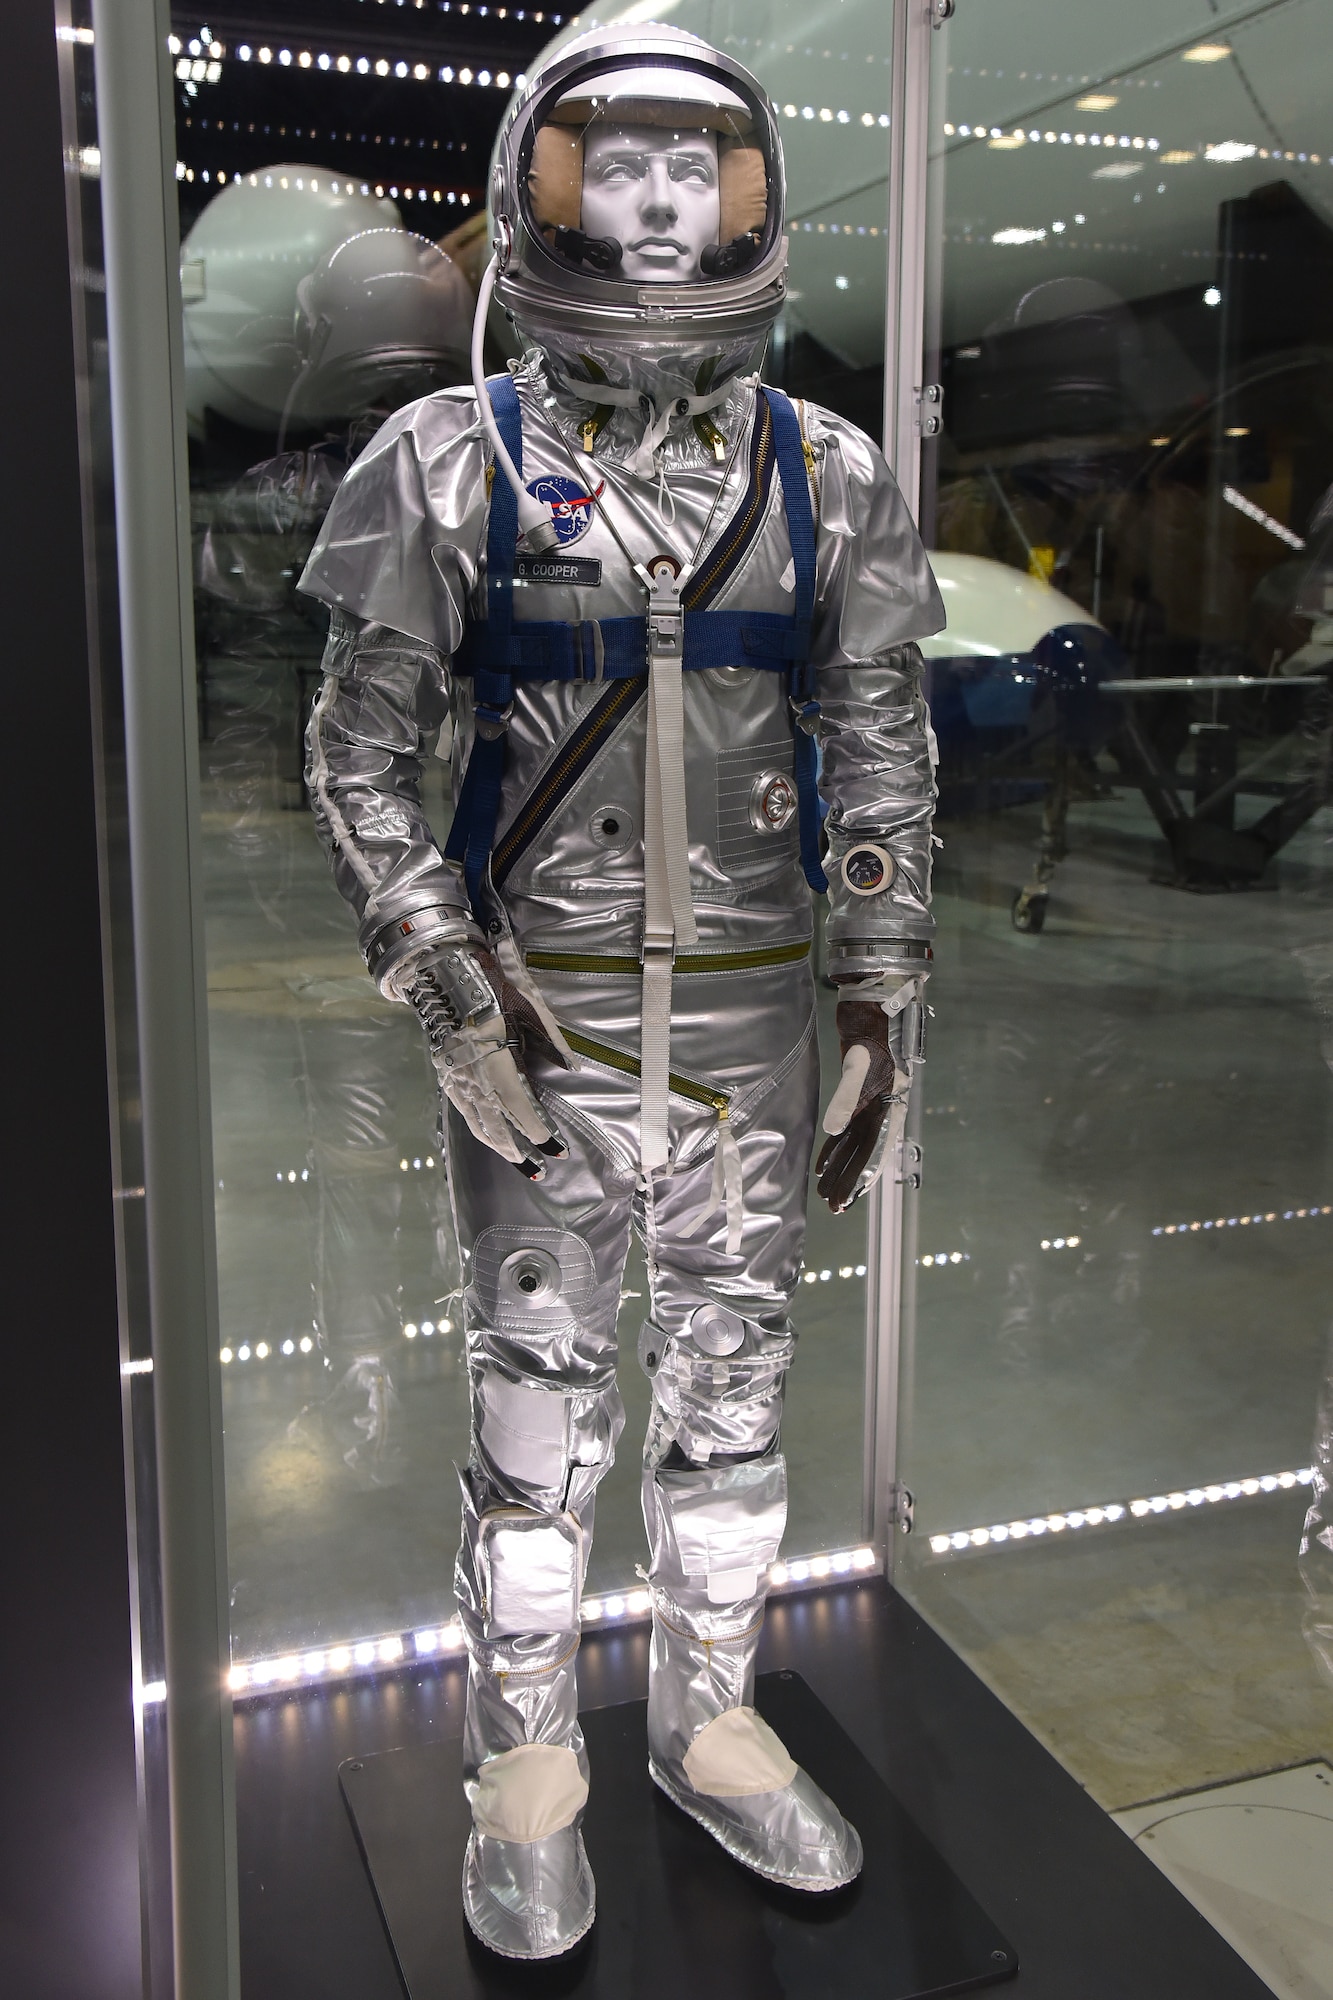 This space suit represents the one worn by U.S. Air Force Maj. (later Col.) Gordon Cooper in May 1963 aboard his Mercury craft called Faith 7, in which he flew 22 orbits in a 34-hour mission. This suit is a reproduction and is on display in the museum's fourth building.(U.S. Air Force photo by Ken LaRock)